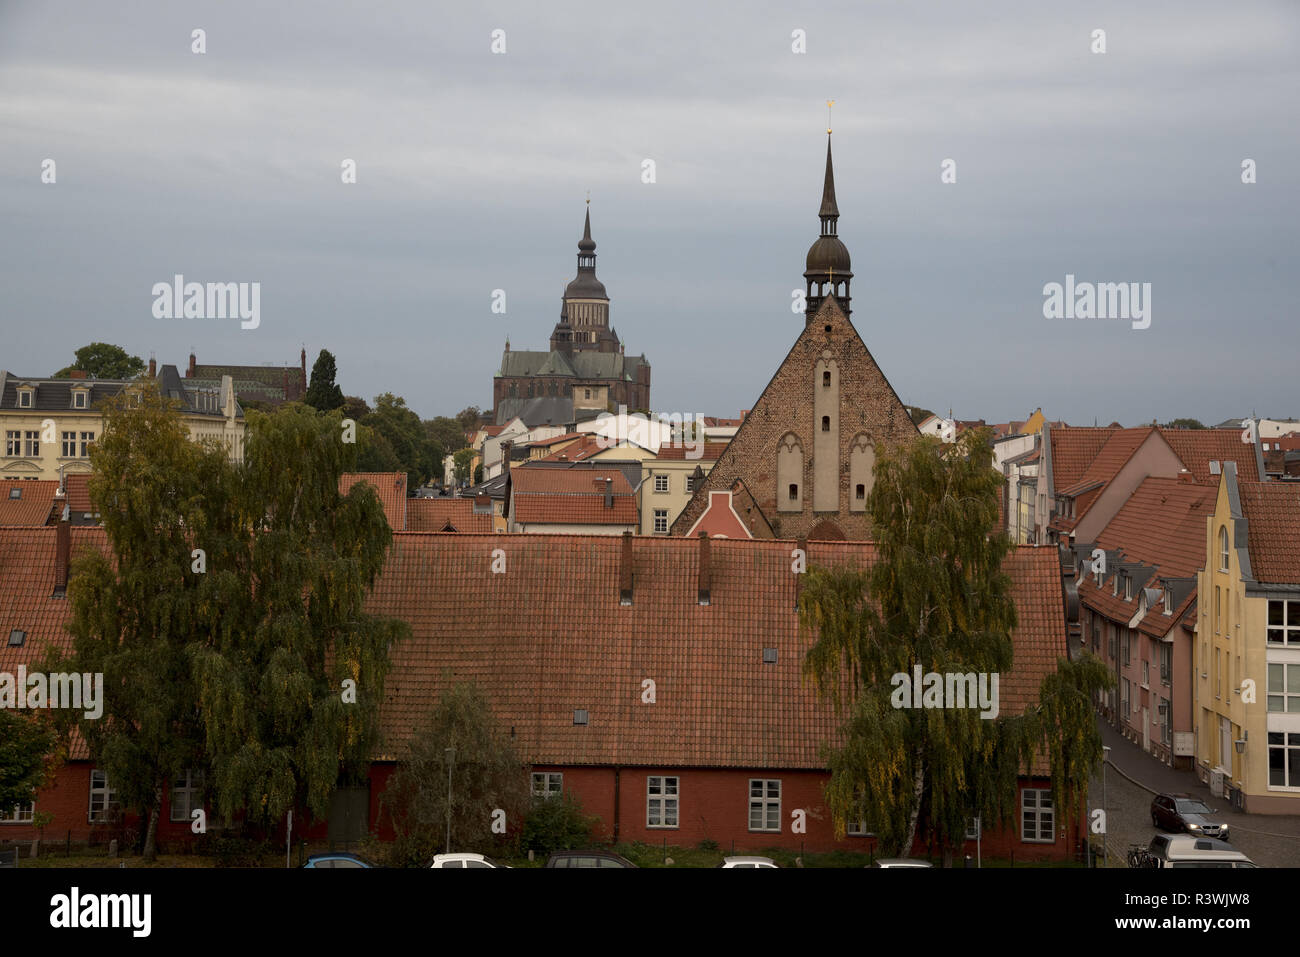 Stralsund is a Hanseatic town in Mecklenbug-Vorpommern in  Germany with some famous churches. Stock Photo